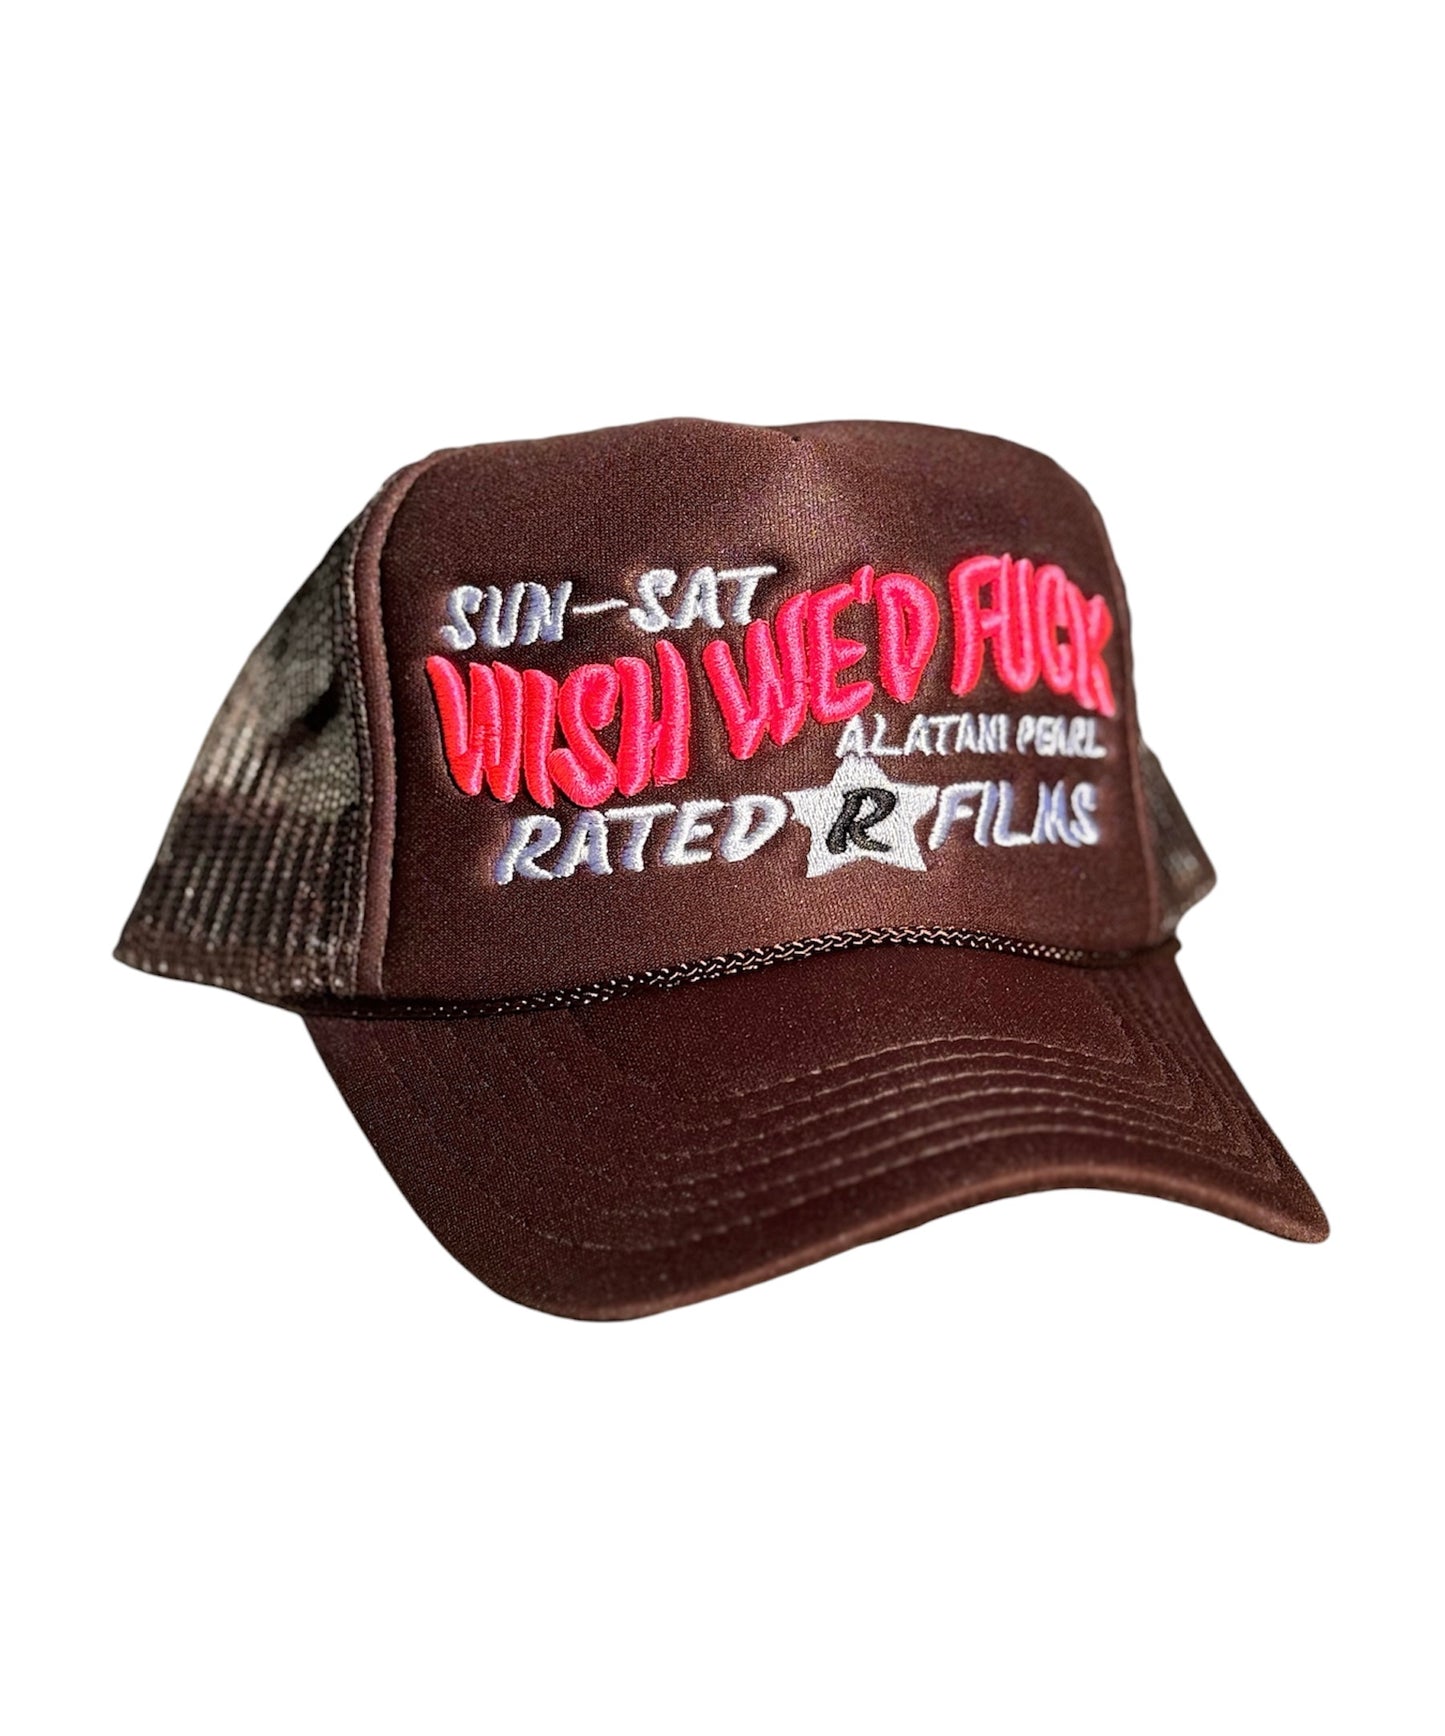 Sunset brown trucker with white embroidery and hot-pink puff embroidery